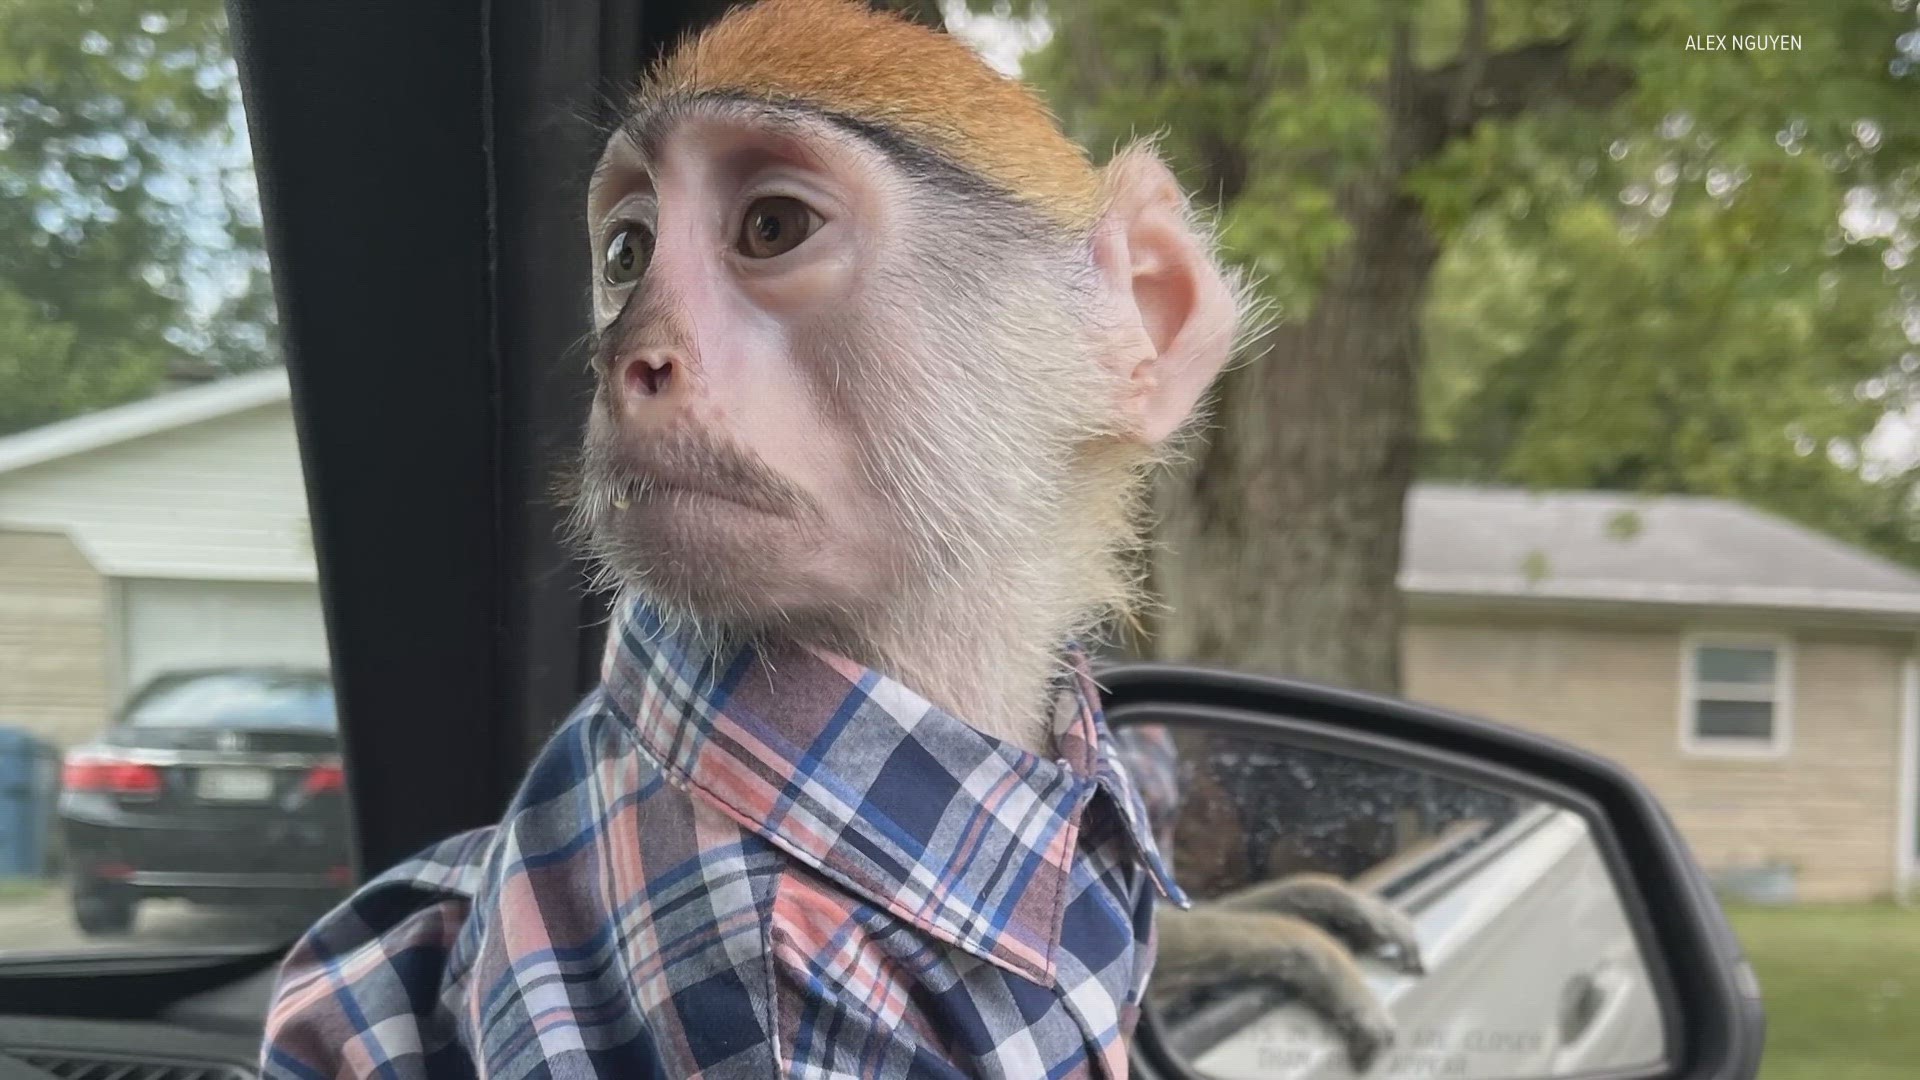 Momo's family tells 13News exclusively they were tricked into handing their monkey over to authorities and are threatening to sue the city to get him back.